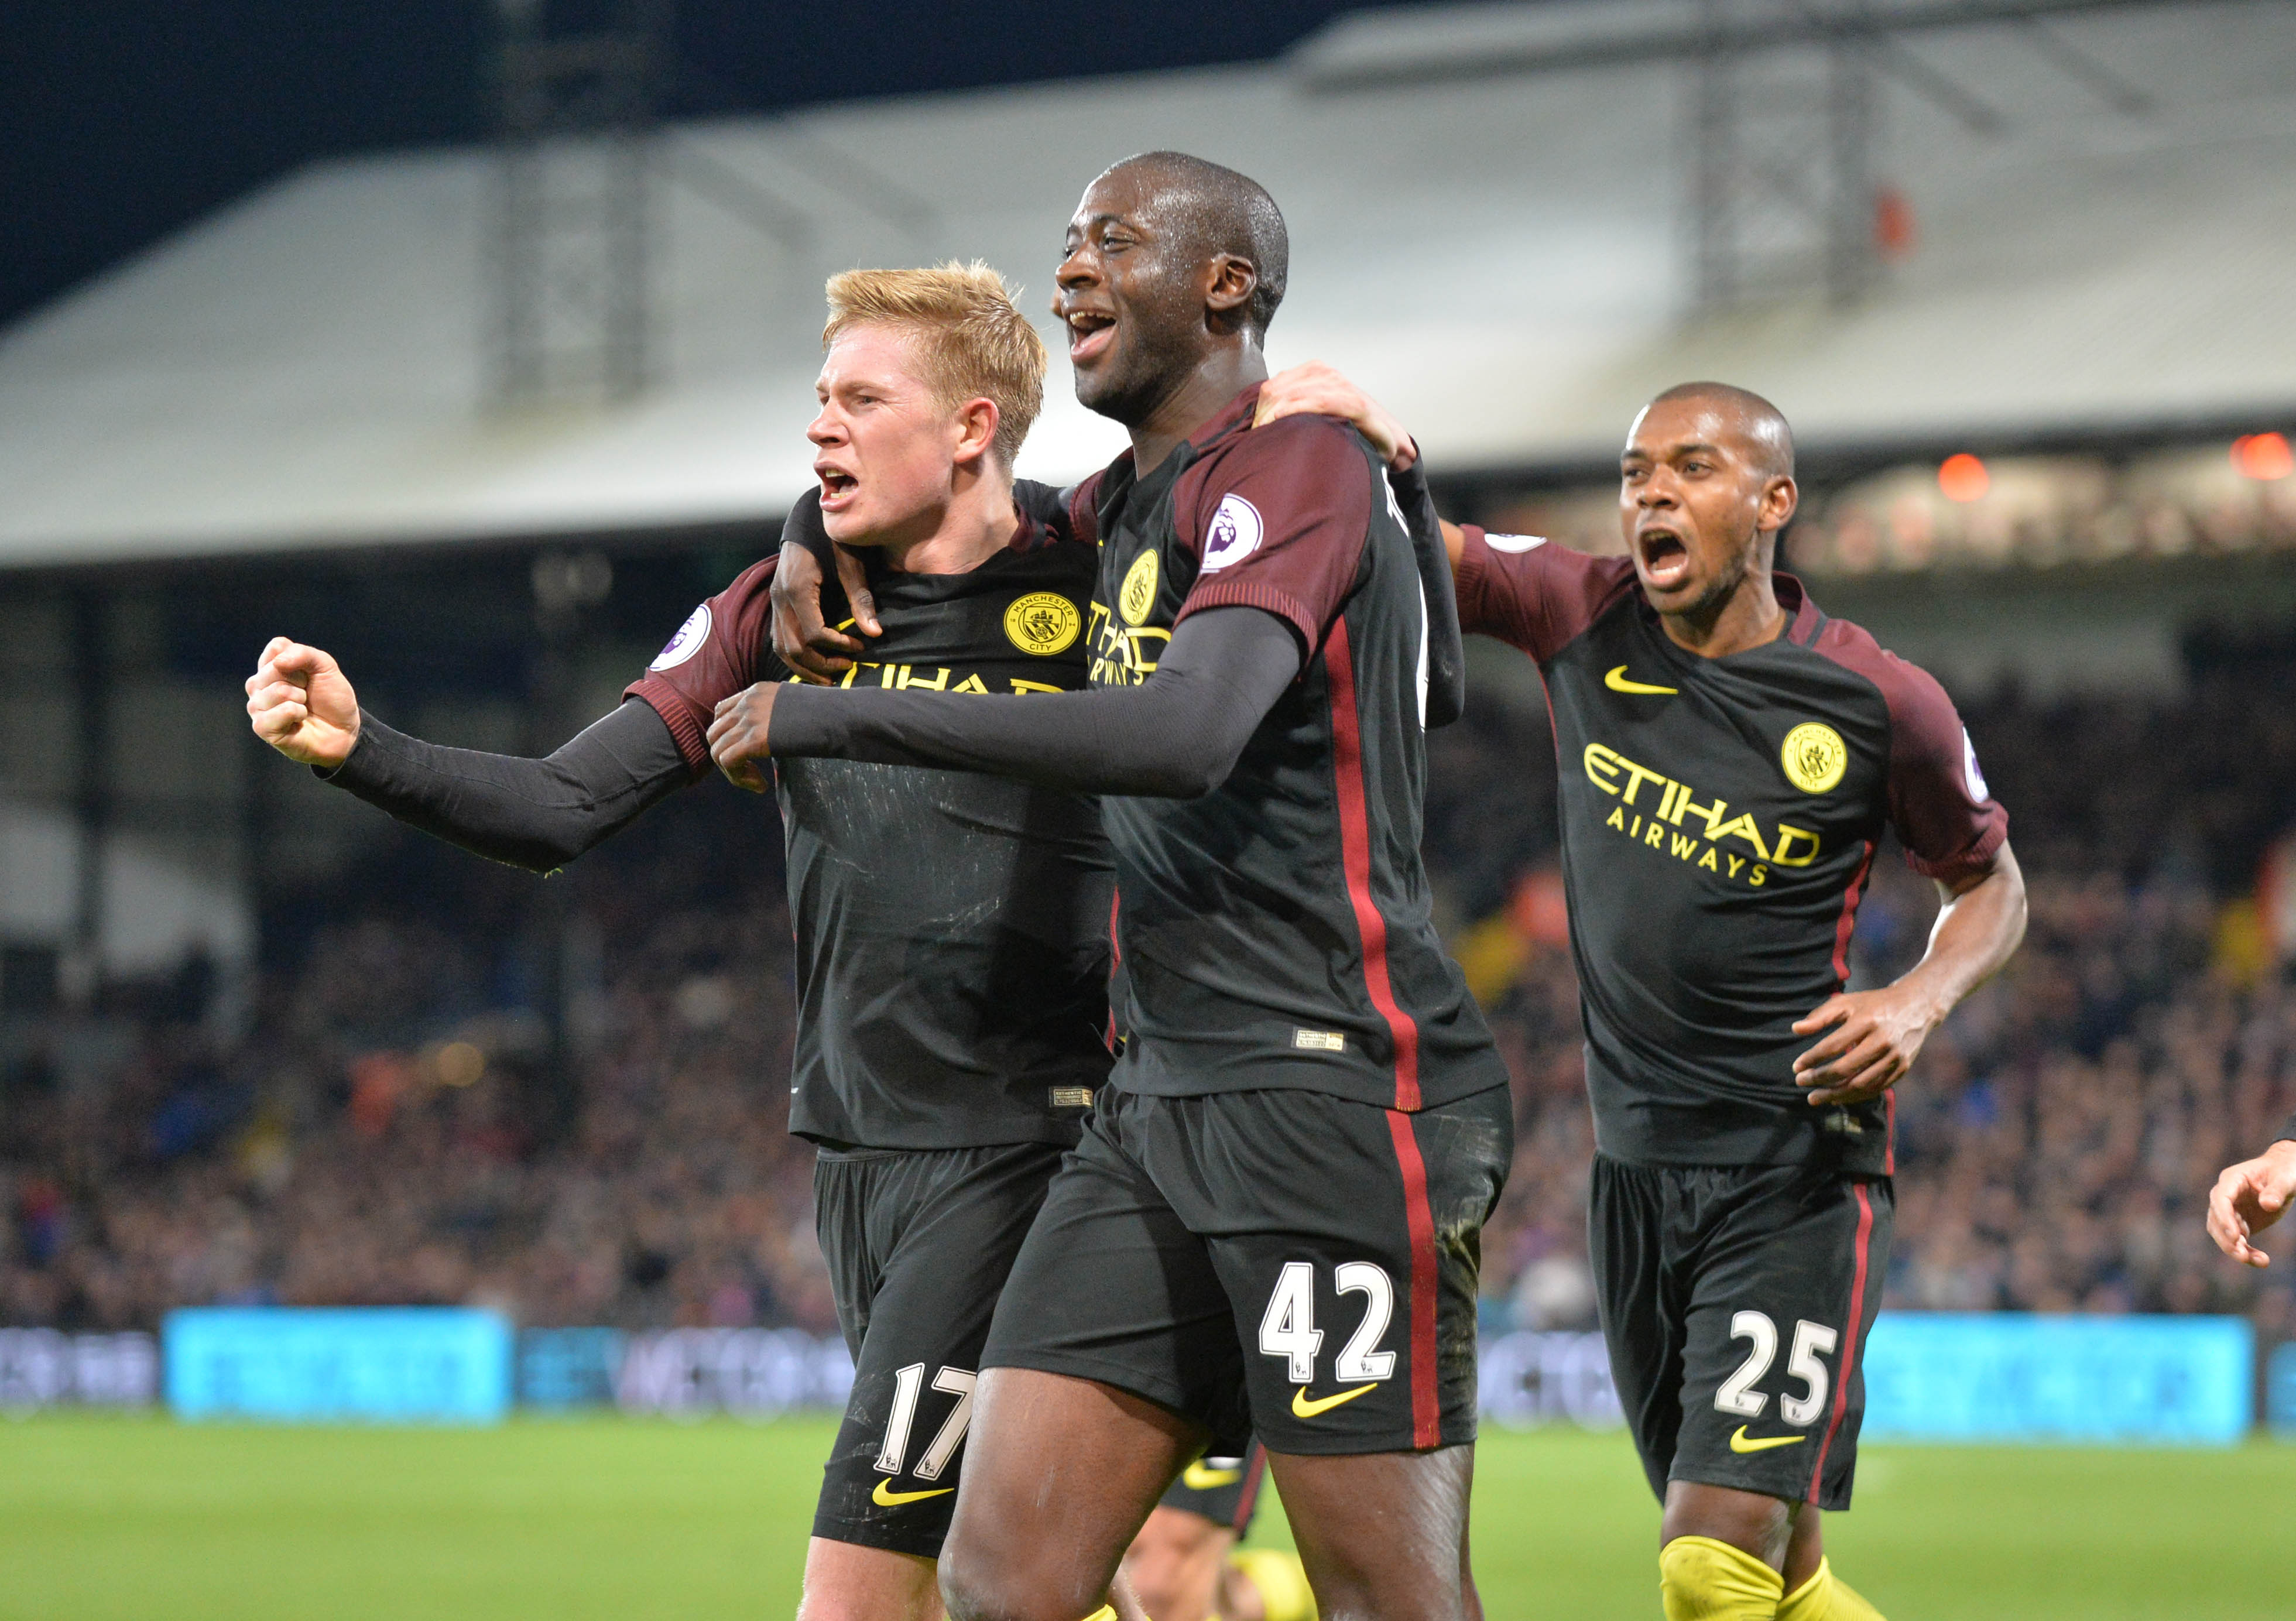 Manchester City's Ivorian midfielder Yaya Toure (C) celebrates with Manchester City's Belgian midfielder Kevin De Bruyne (L) and Manchester City's Brazilian midfielder Fernandinho (R) after scoring their second goal during the English Premier League football match between Crystal Palace and Manchester City at Selhurst Park in south London on November 19, 2016. Manchester City won the game 2-1. / AFP / OLLY GREENWOOD / RESTRICTED TO EDITORIAL USE. No use with unauthorized audio, video, data, fixture lists, club/league logos or 'live' services. Online in-match use limited to 75 images, no video emulation. No use in betting, games or single club/league/player publications. / (Photo credit should read OLLY GREENWOOD/AFP/Getty Images)